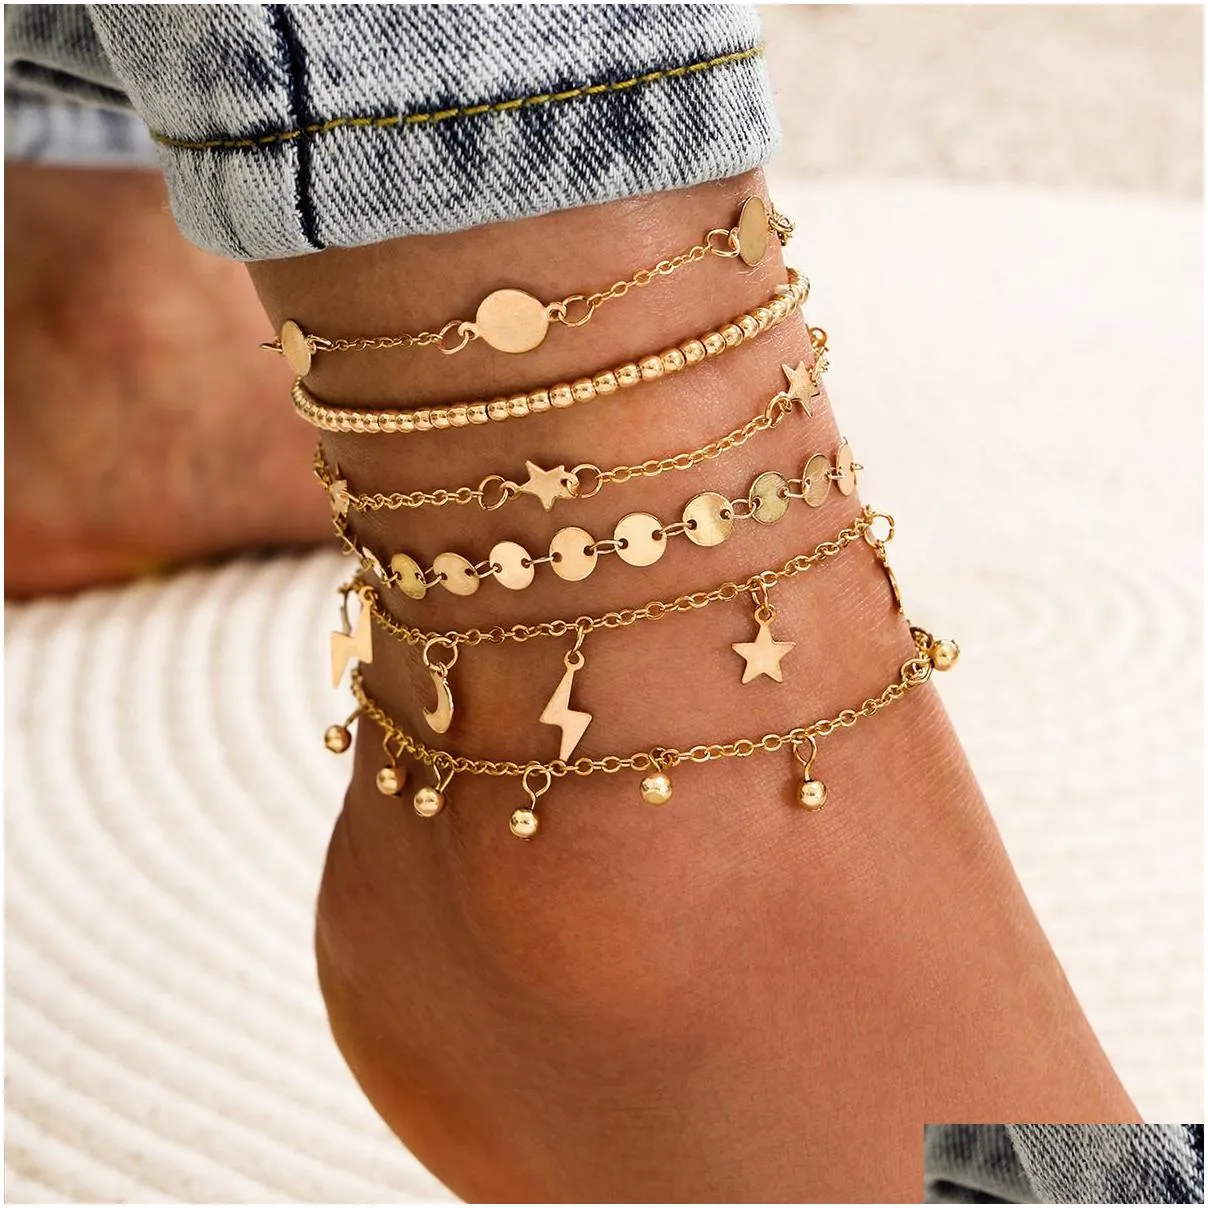 6pcs Set Simple Lightning Moon Five-pointed Star Anklet Water Drop Tassel Handmade Foot Ornaments Anklets for Women`s Jewelry Gifts